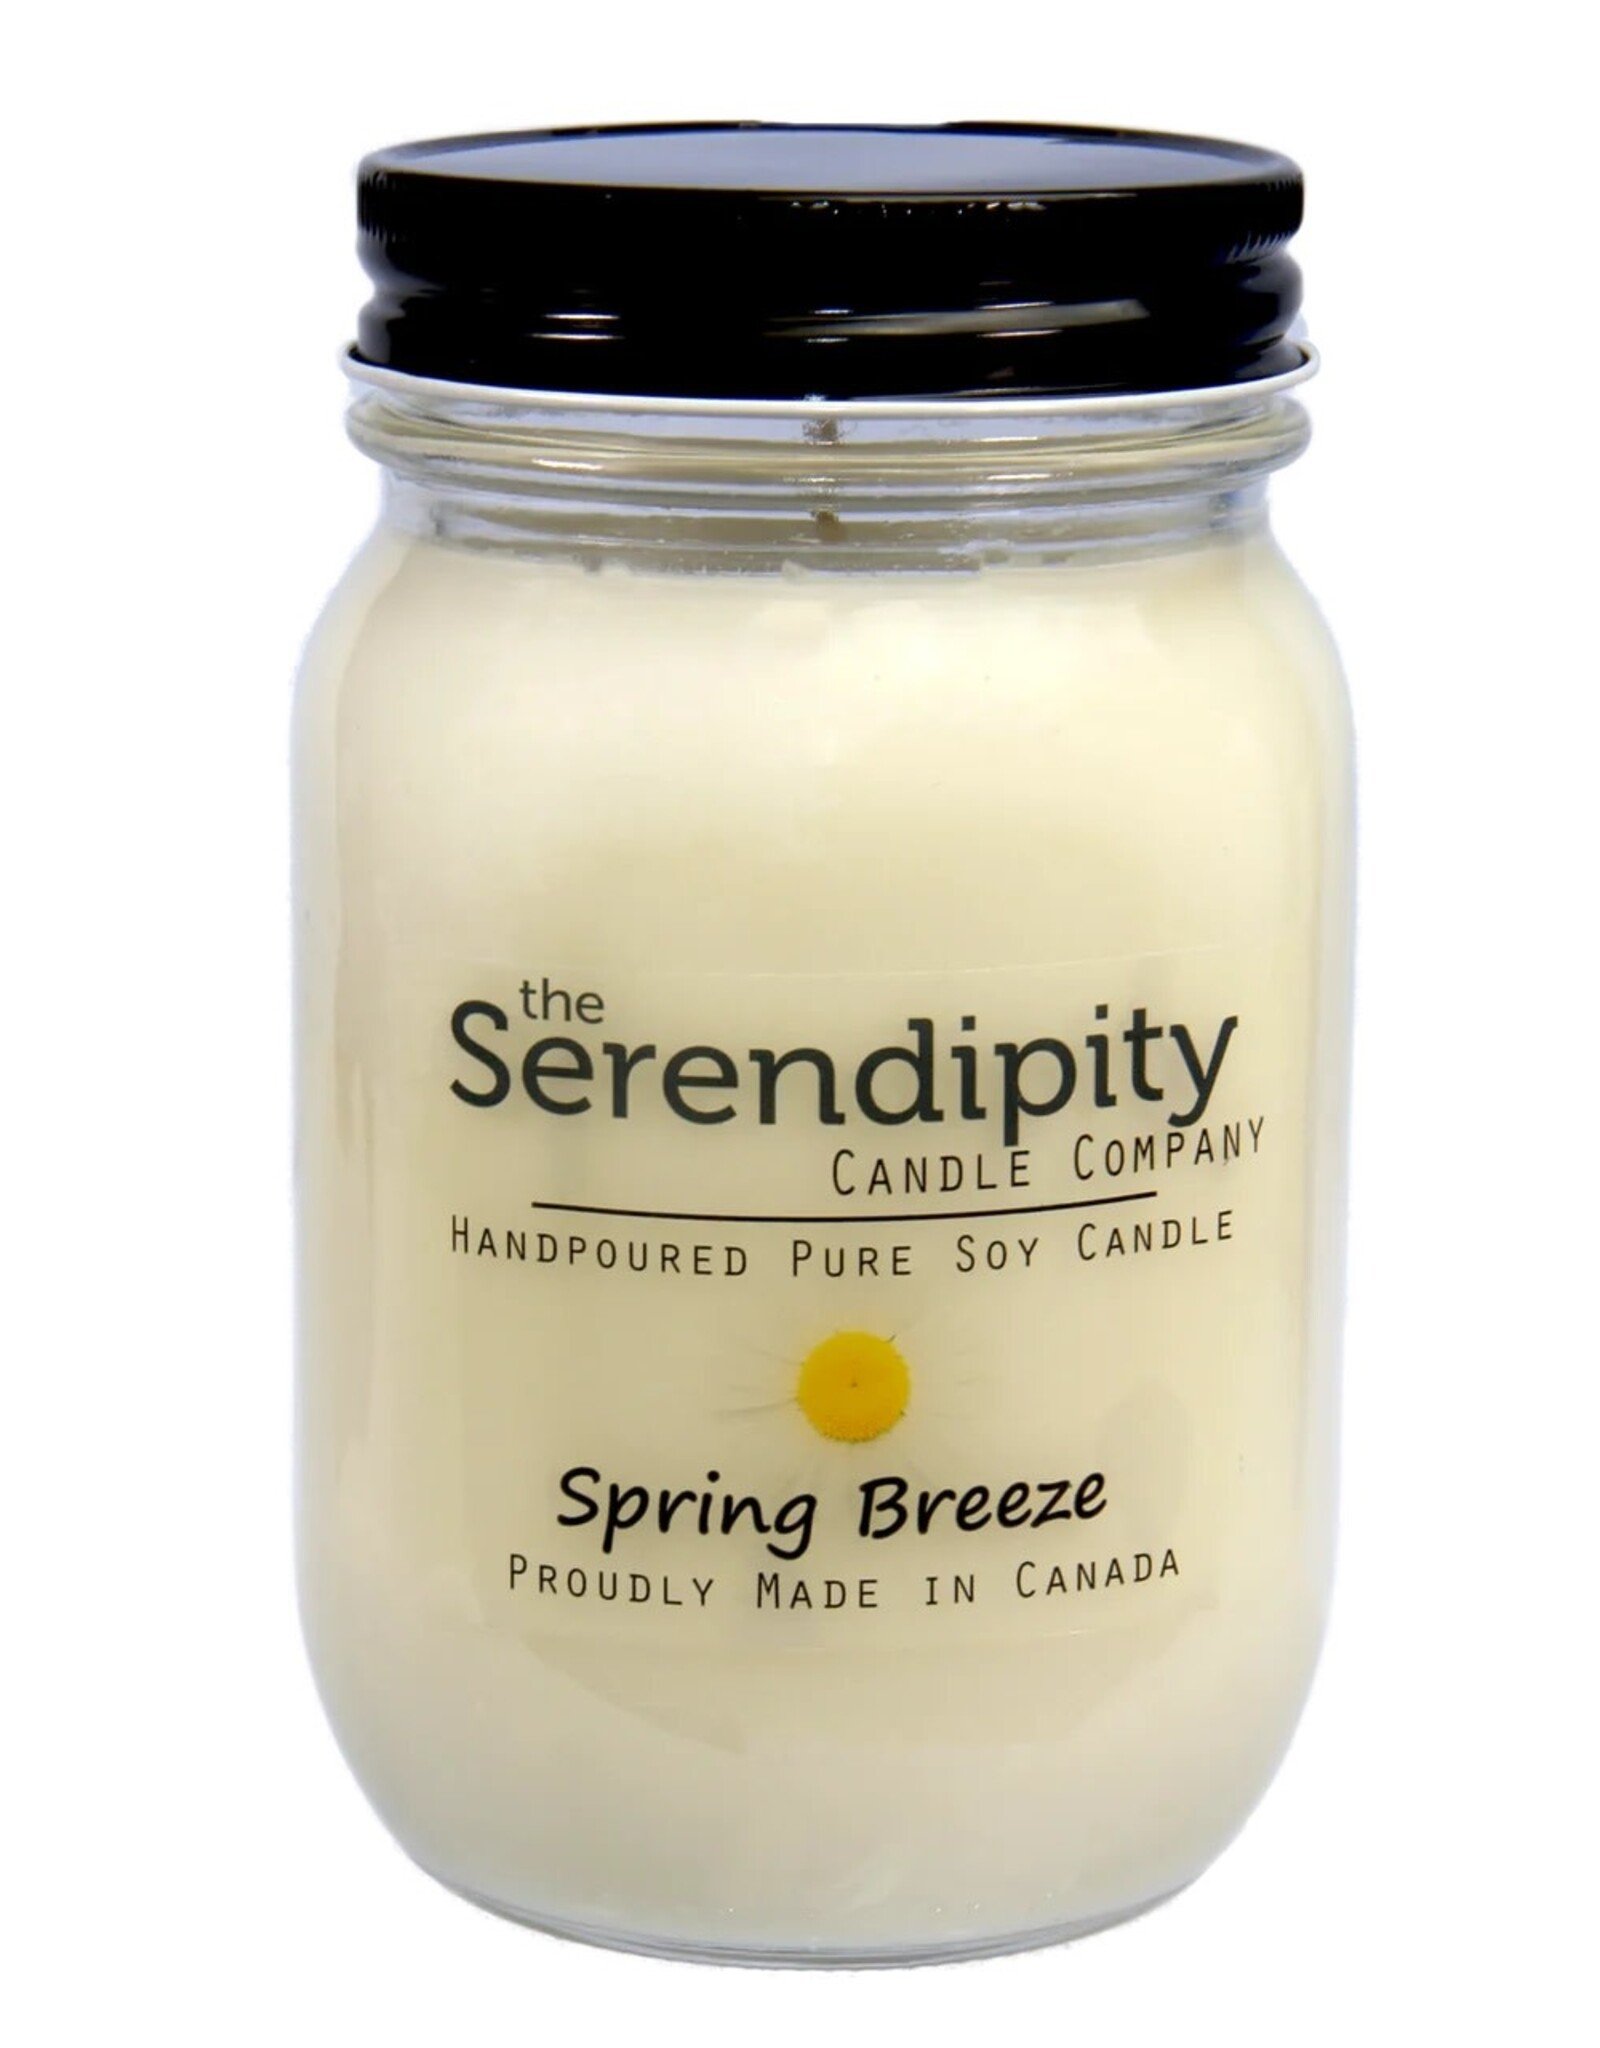 Serendipity Soy Candles 16oz Jar Candle - Spring Breeze